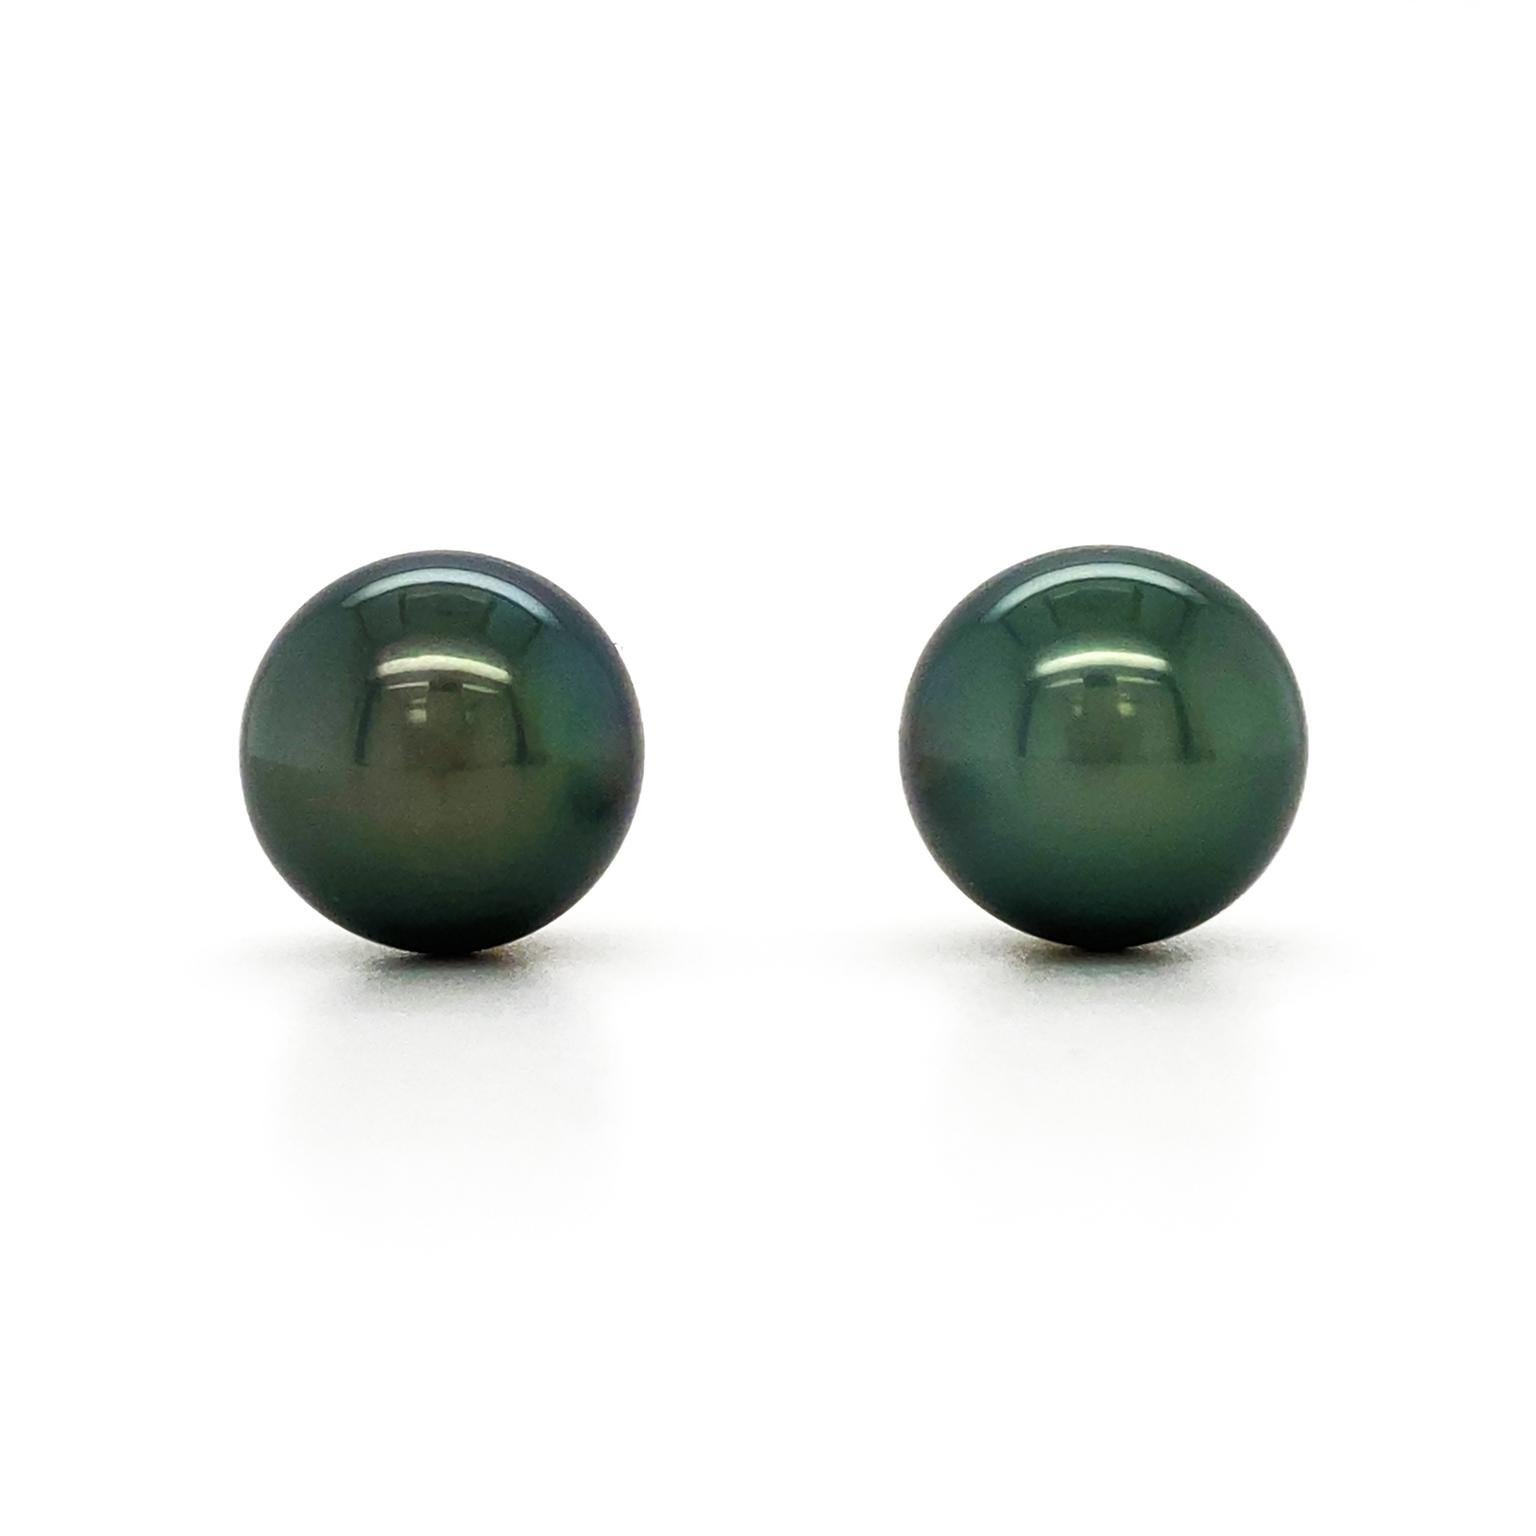 The luster of a Tahitian pearl is the focus of a unique interpretation of the classic pearl stud earrings. Deep forest green tones with an undercurrent of warm gold are visible as the light reflects across the gemstone. The total weight of the